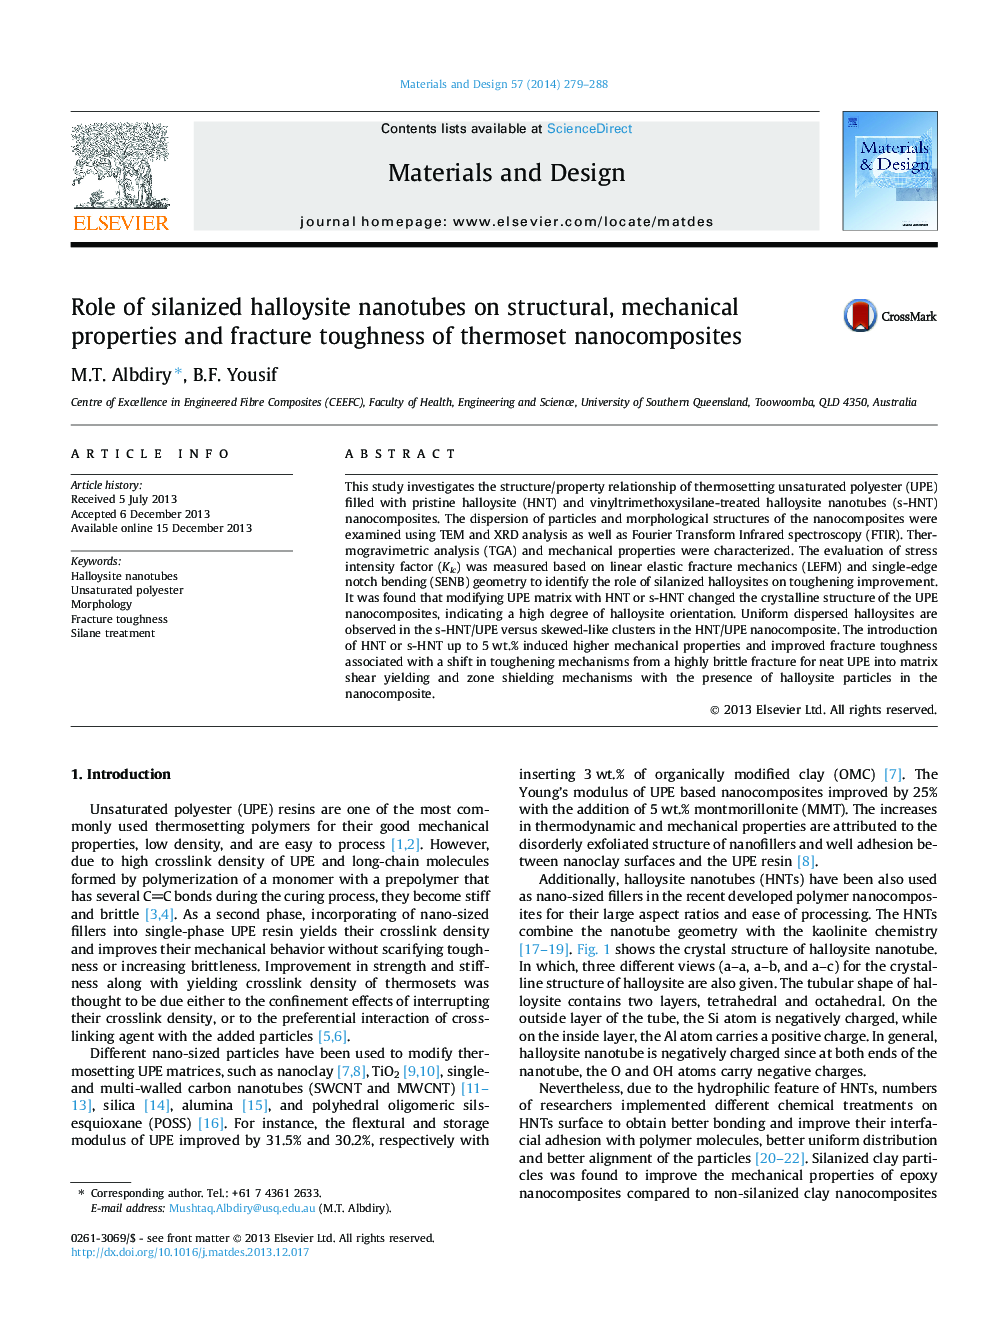 Role of silanized halloysite nanotubes on structural, mechanical properties and fracture toughness of thermoset nanocomposites